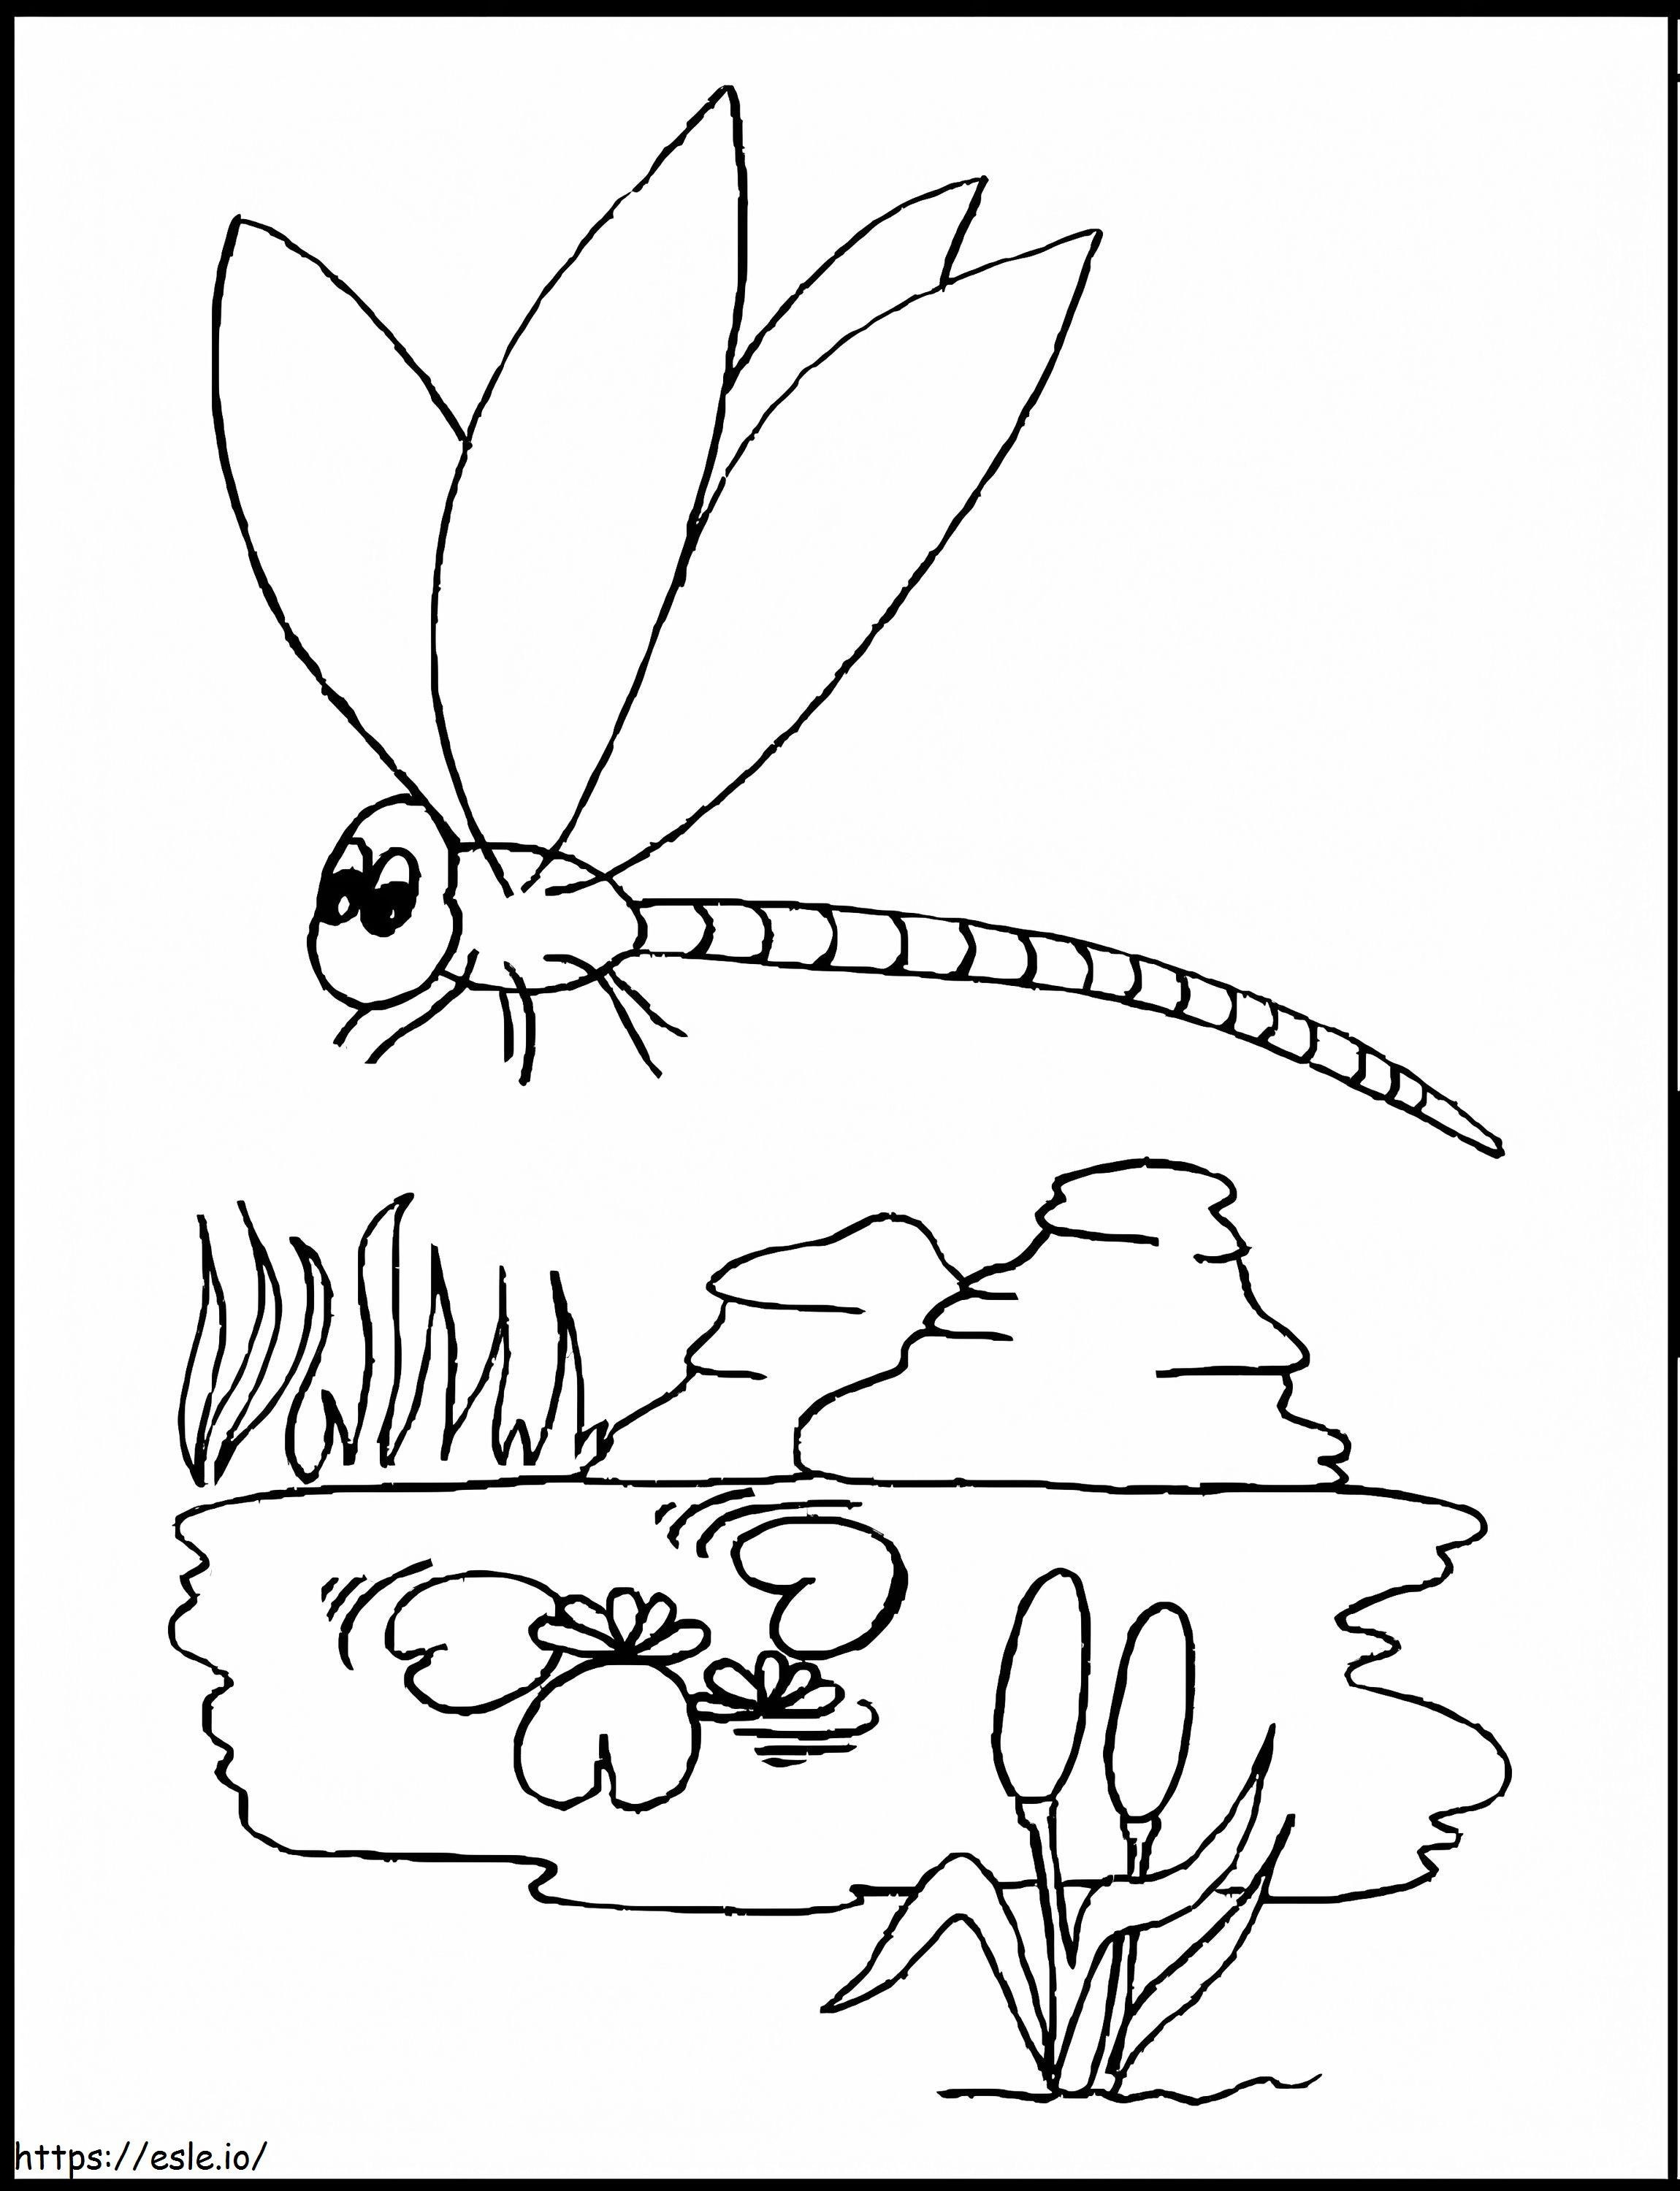 Lovely Dragonfly coloring page